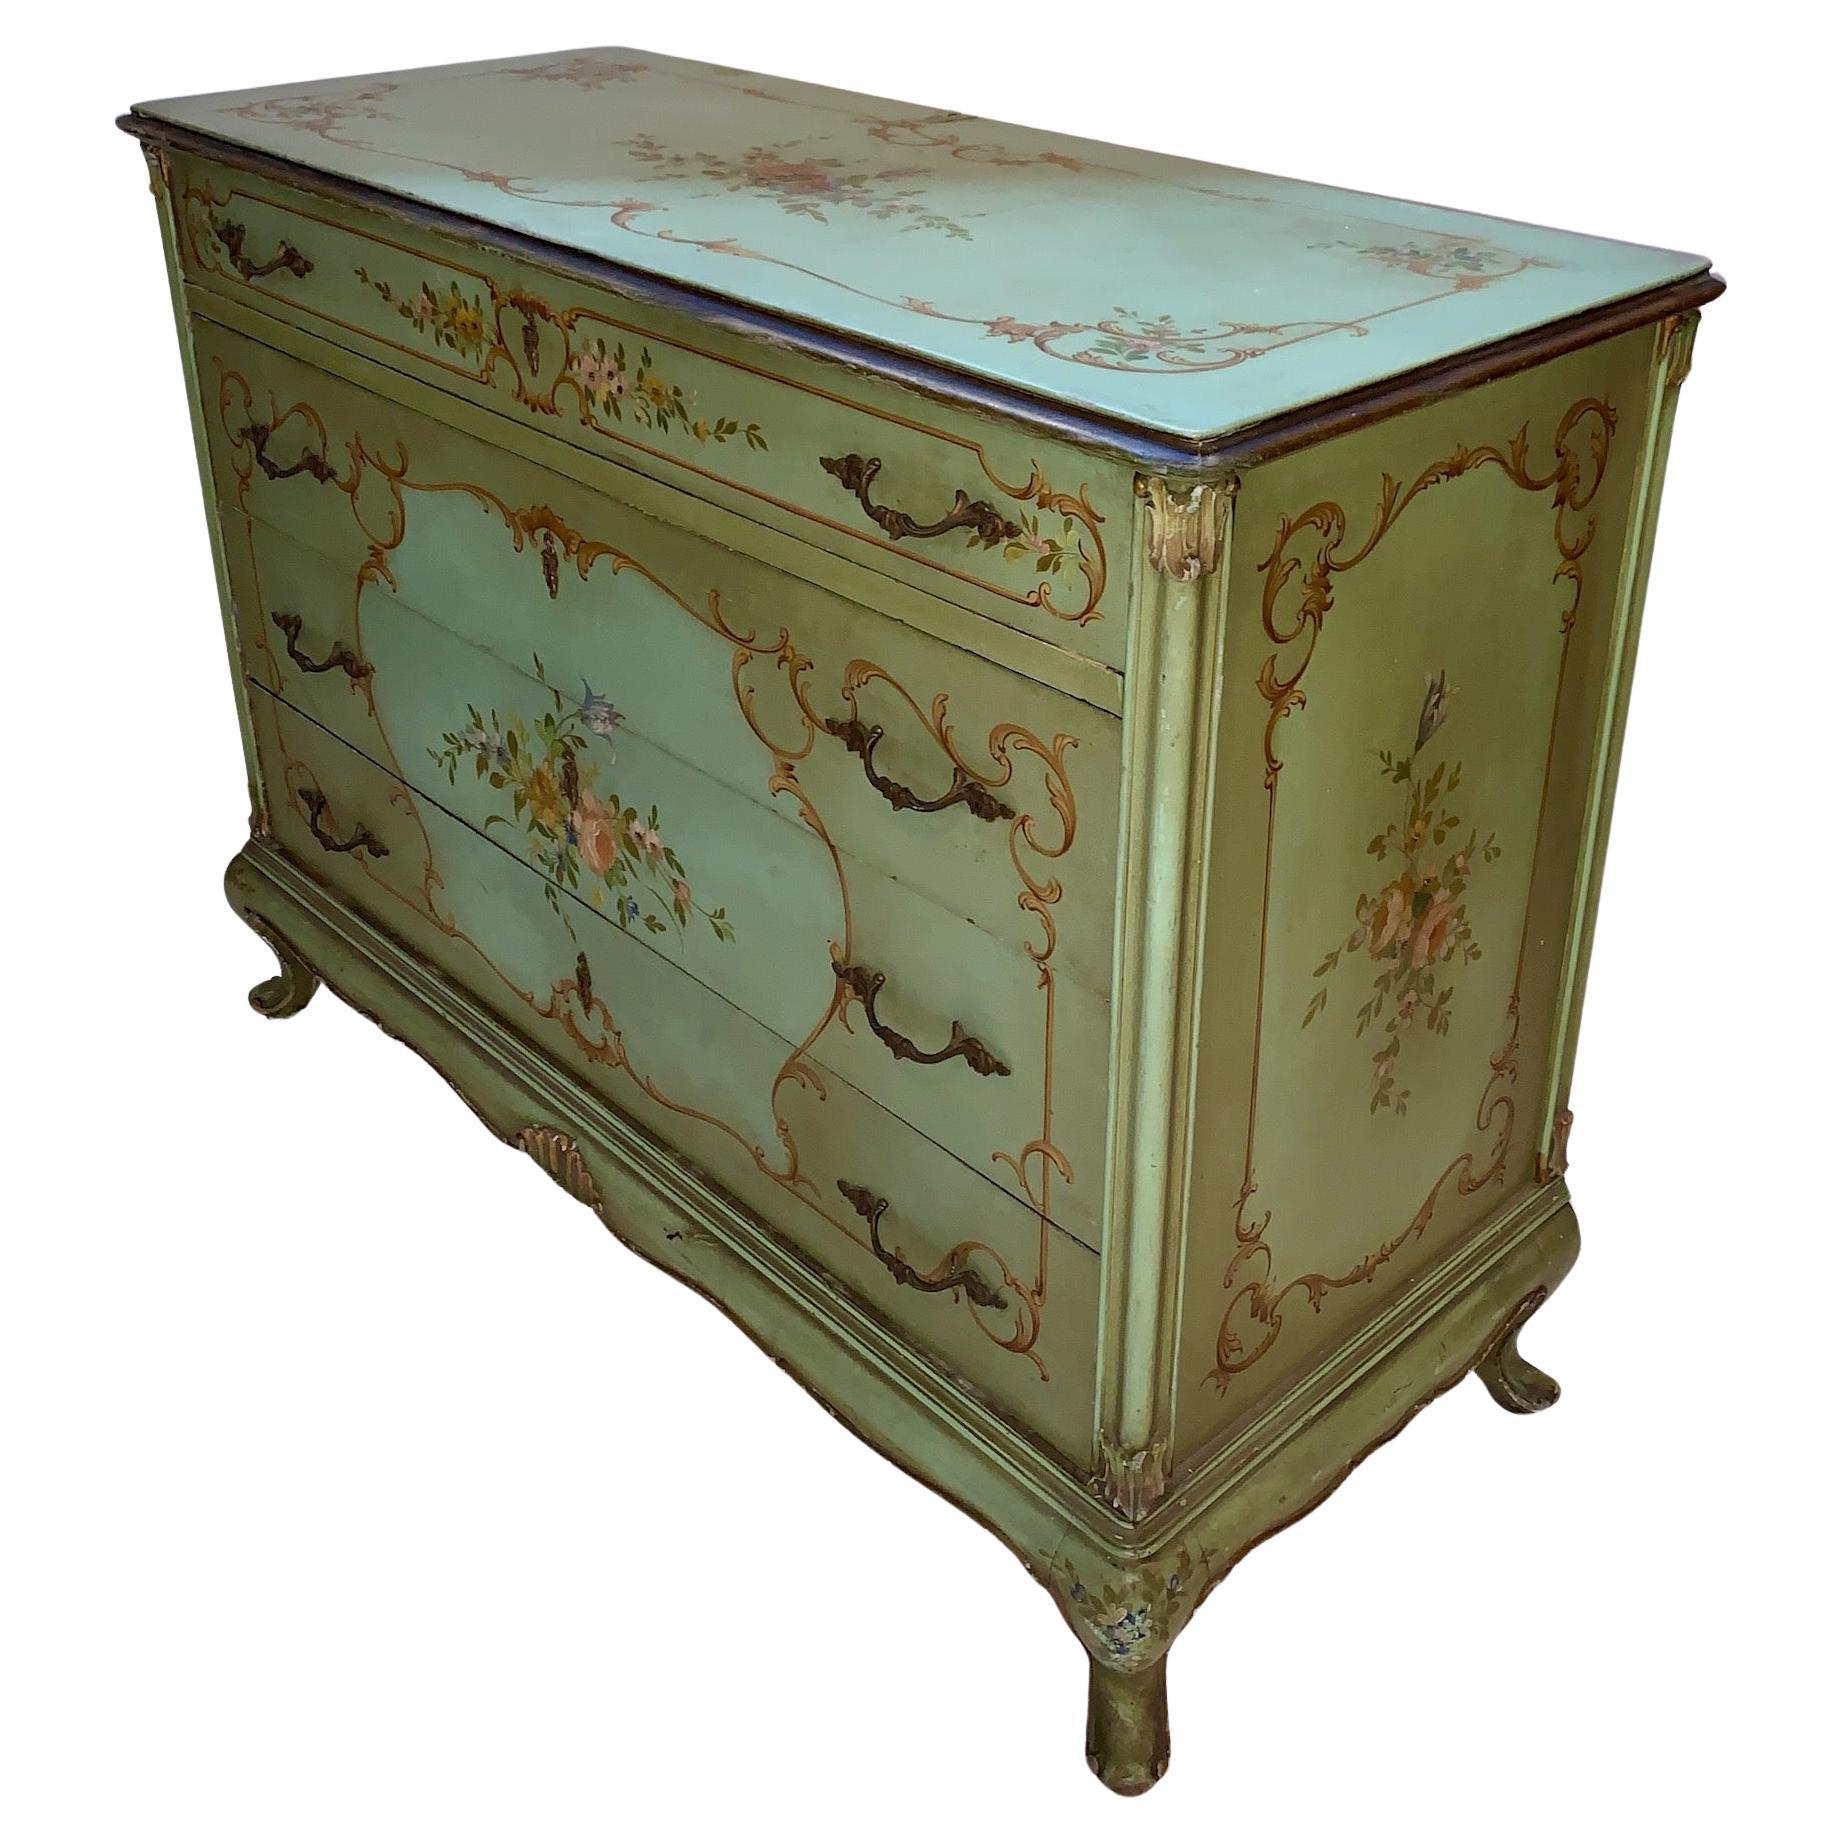 An elegant and beautiful Louis XV style Venetian floral paint decorated and partial gilt four drawer dresser consisting of a full length narrow accessories drawer above three large drawers. This piece is done in beautiful calming green tones and a